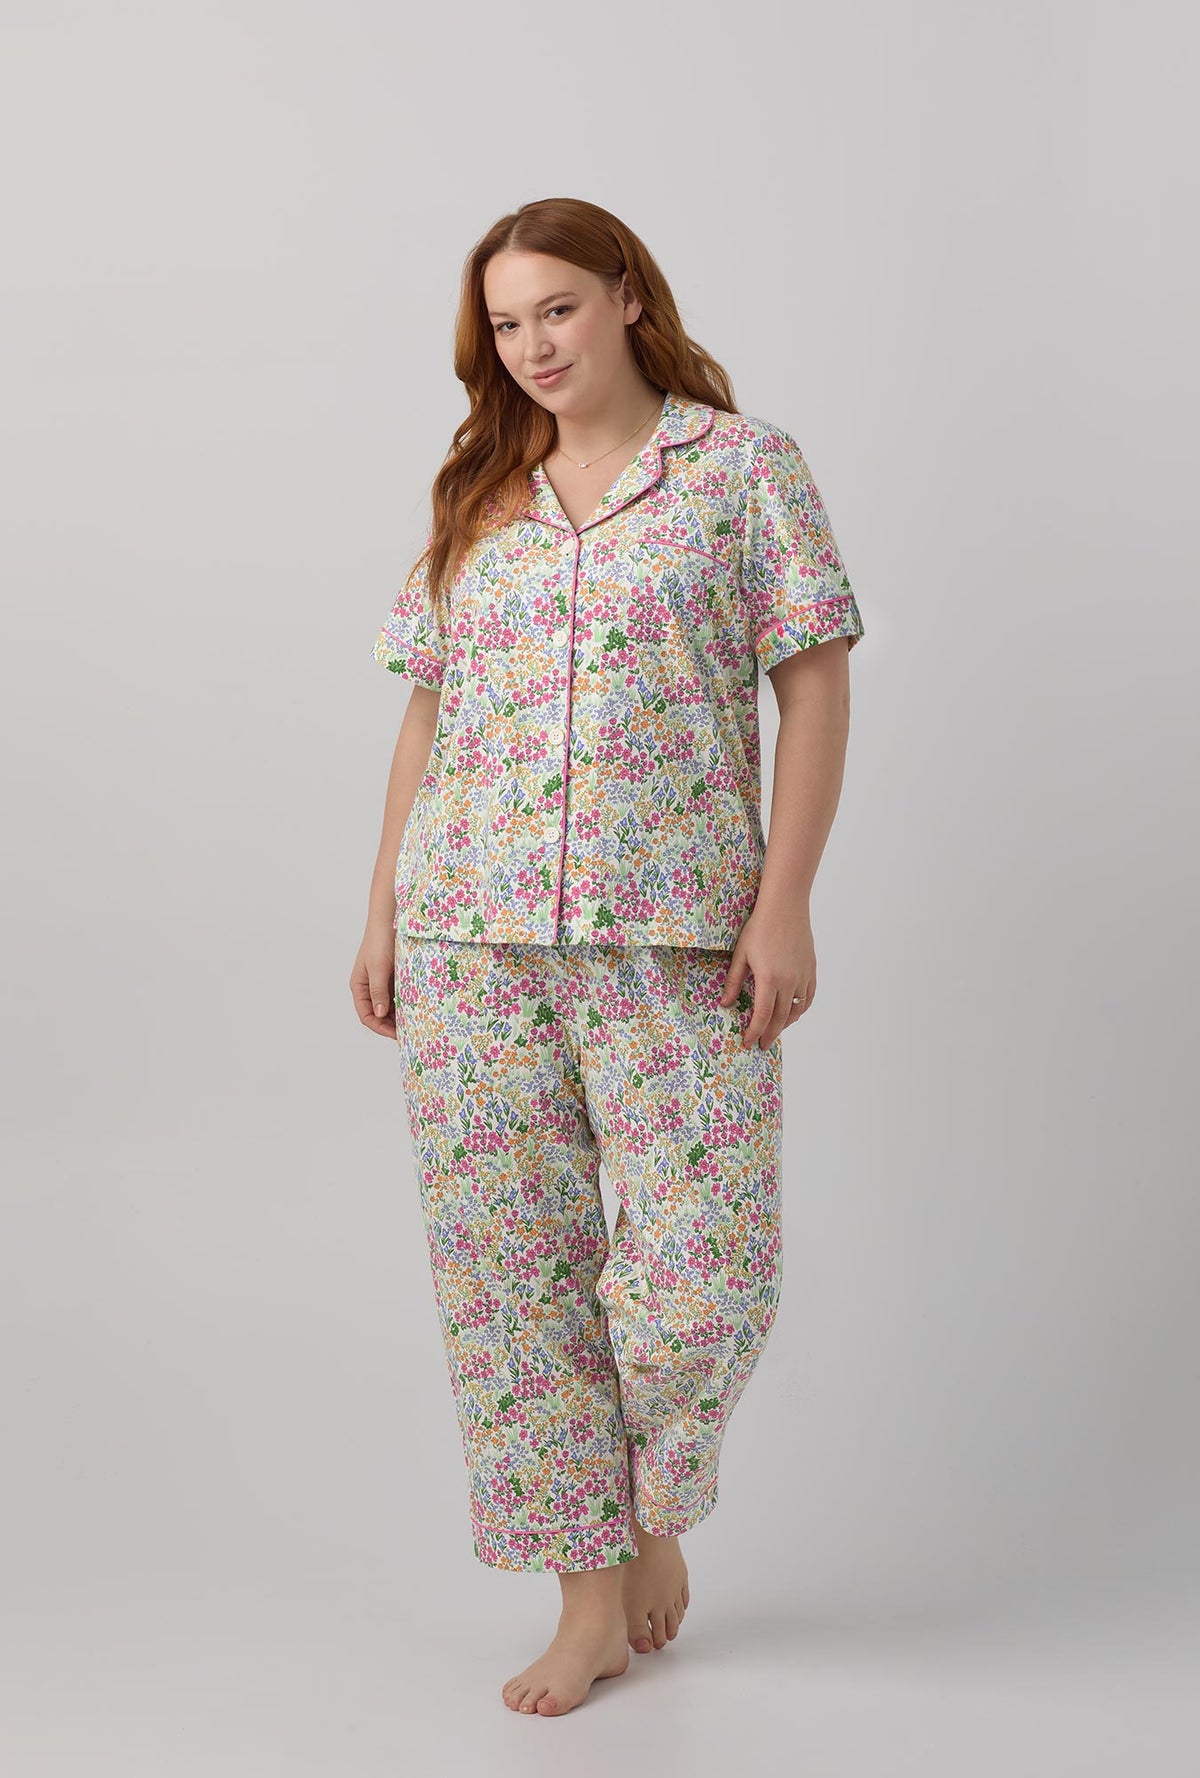 A lady wearing multi color shoe=rt sleeve clasic stretch jersey cropped plus size pj set with cottage garden print.